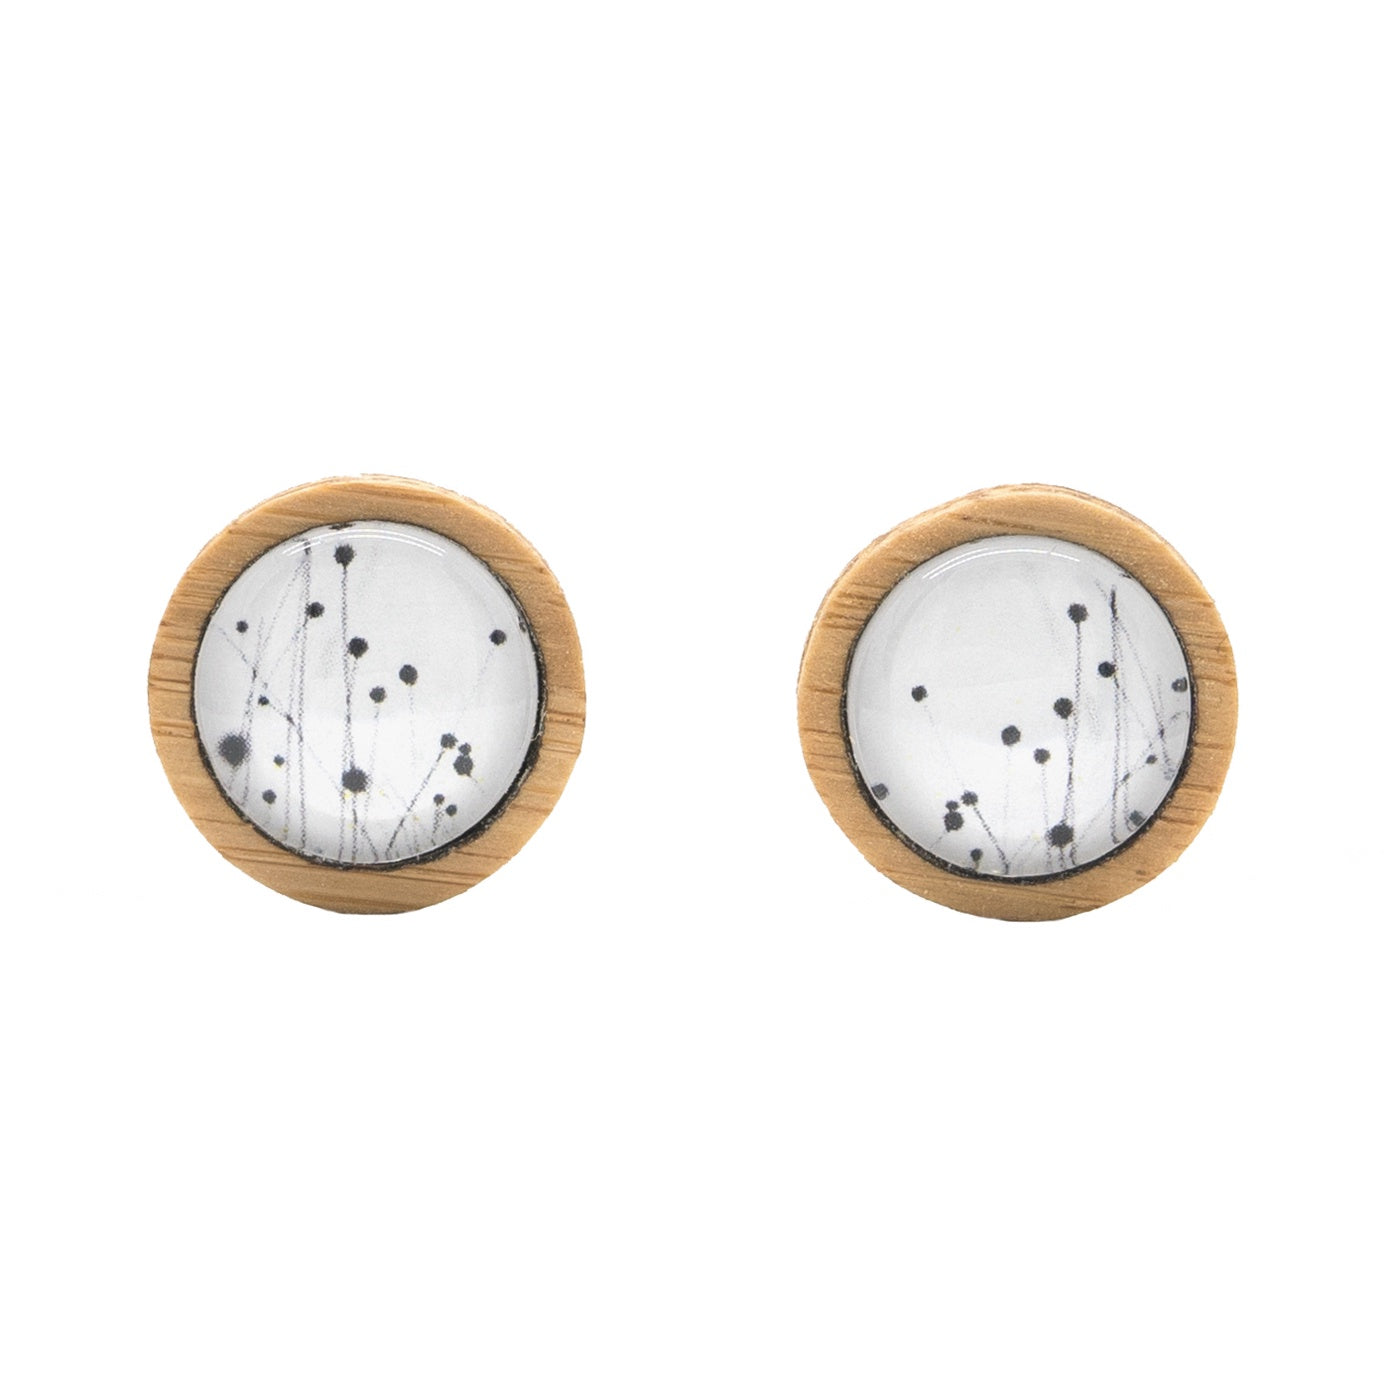 Myrtle & Me - Stud Earrings - Buttongrass - White